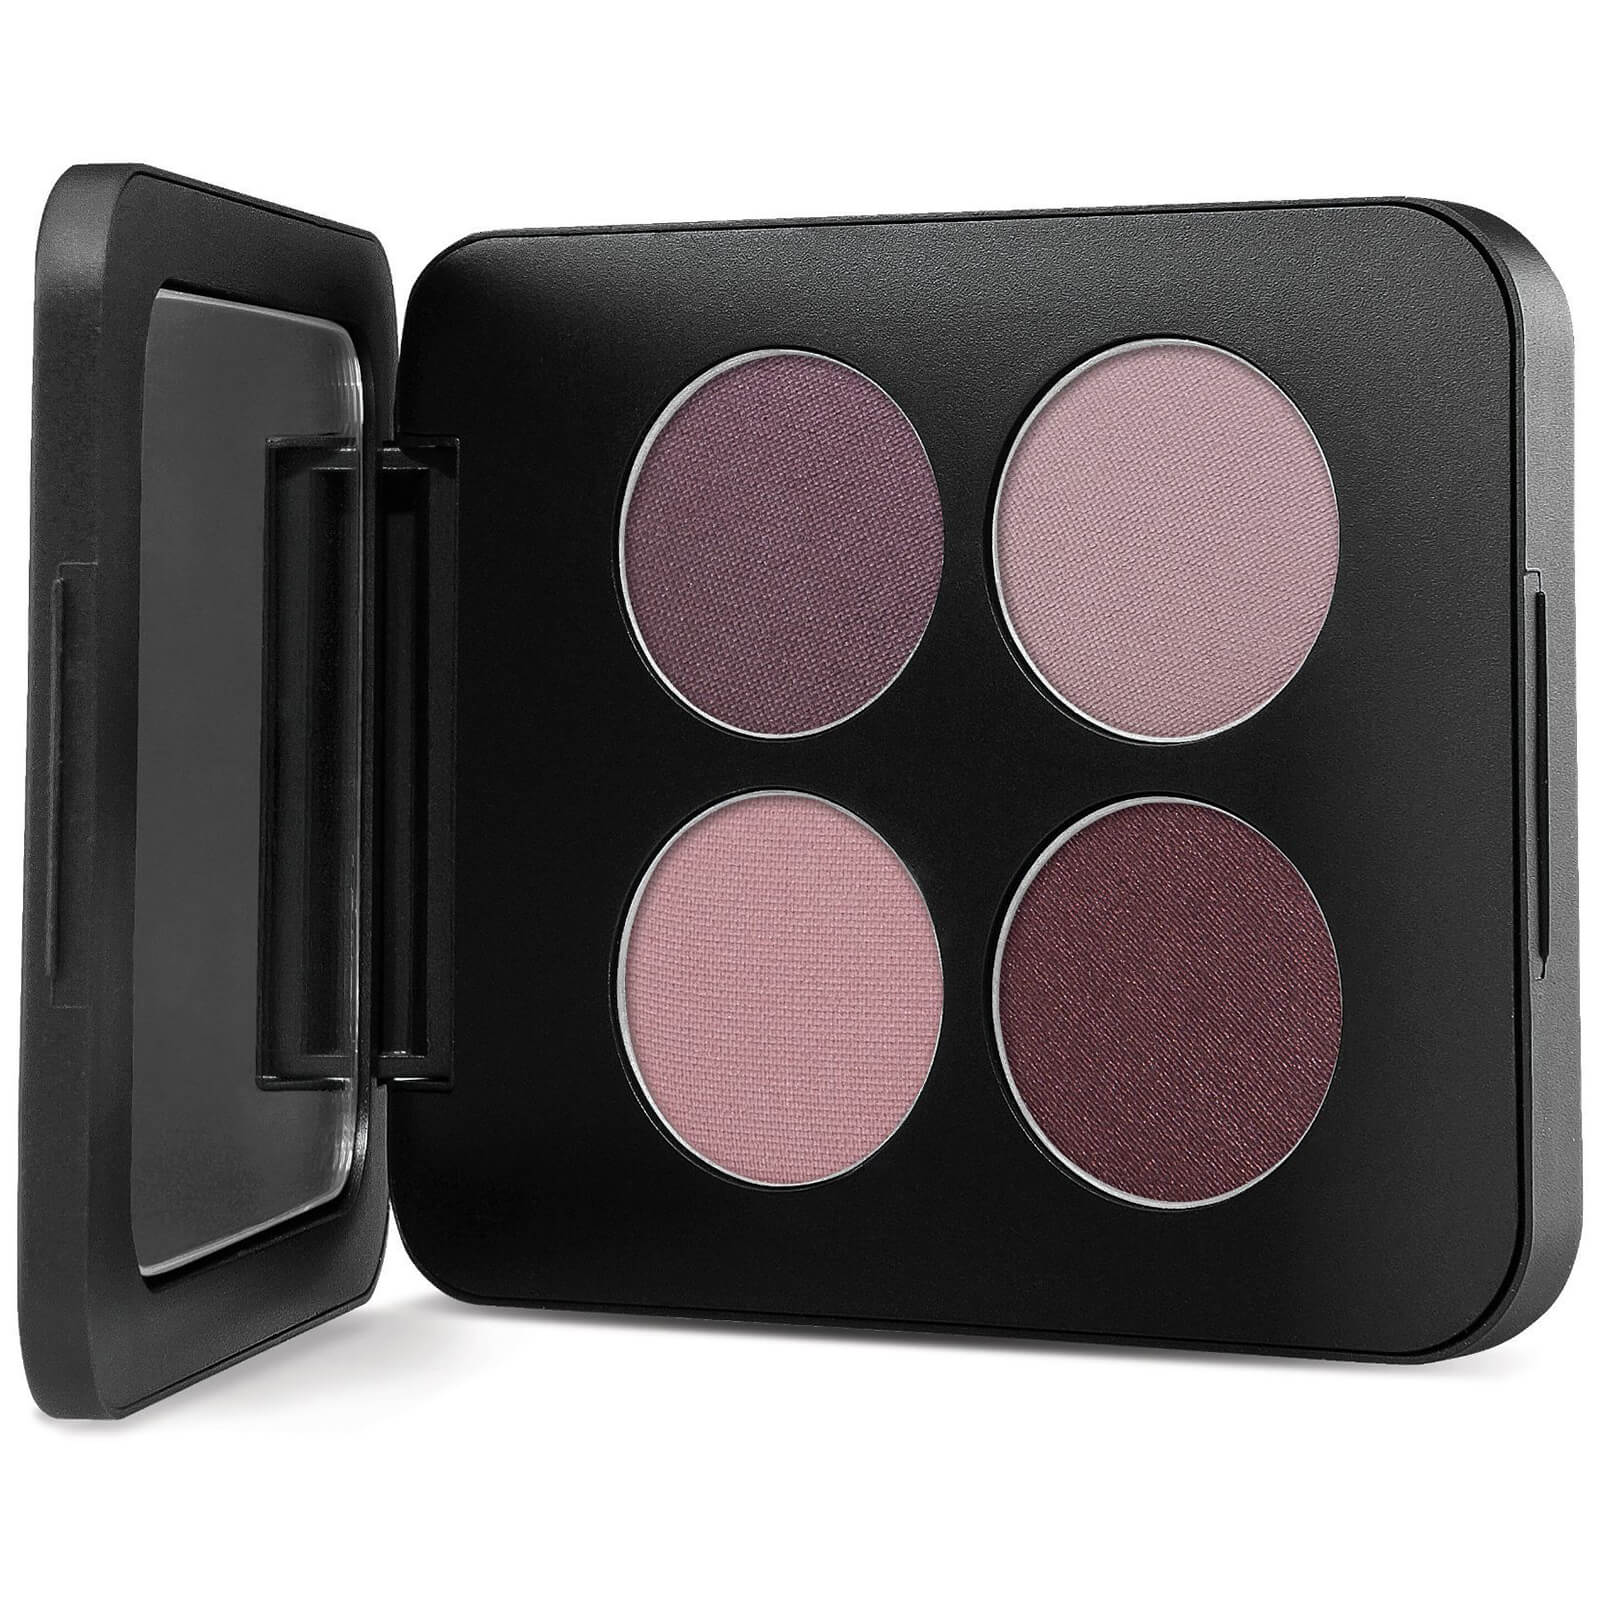 Youngblood Pressed Mineral Eyeshadow Quad 4g (Various Shades) - Vintage